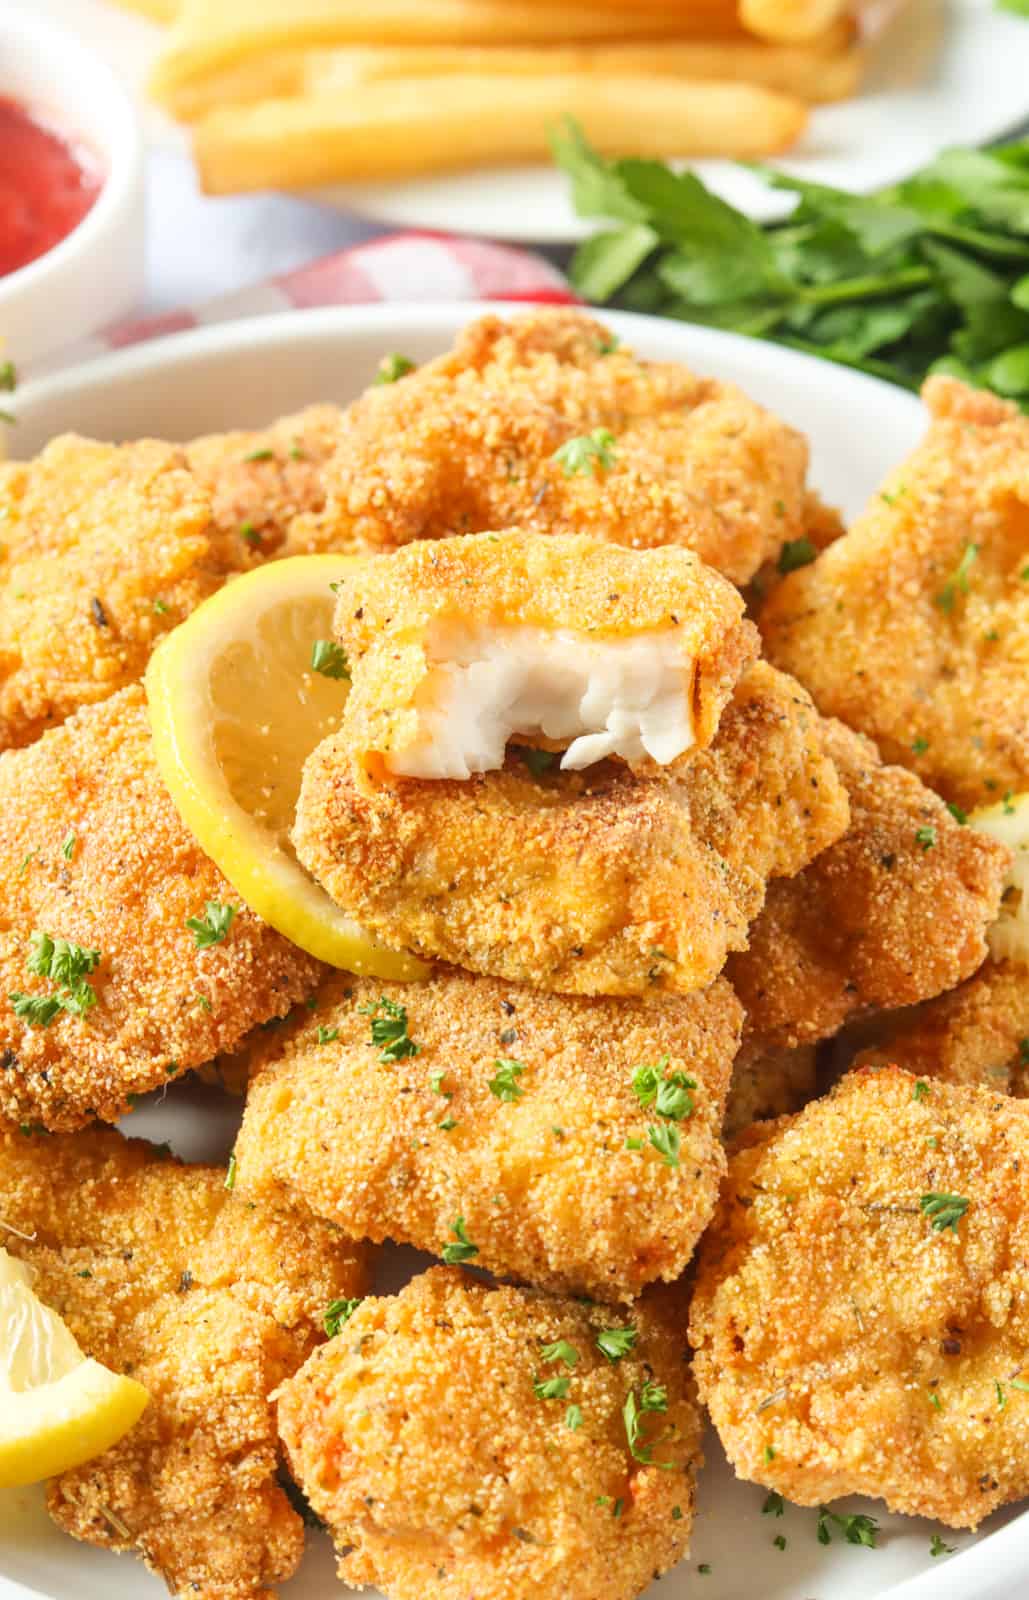 While enjoying bite-sized catfish nuggets, show off the plump contents